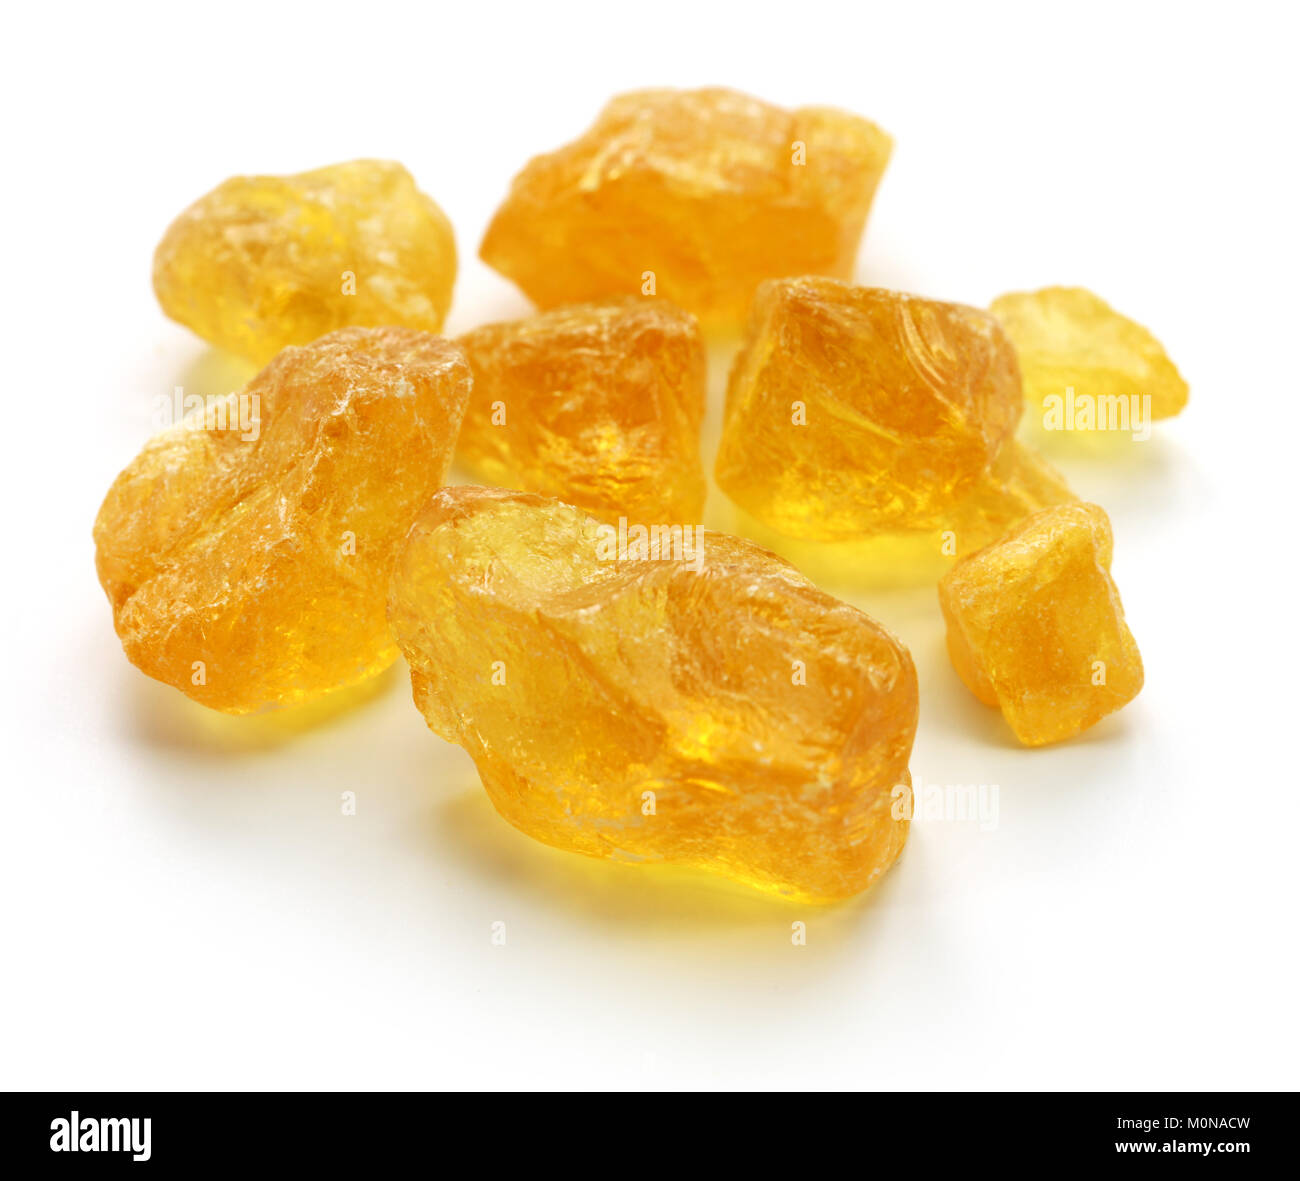 resin from copal tree, incense ingredient Stock Photo